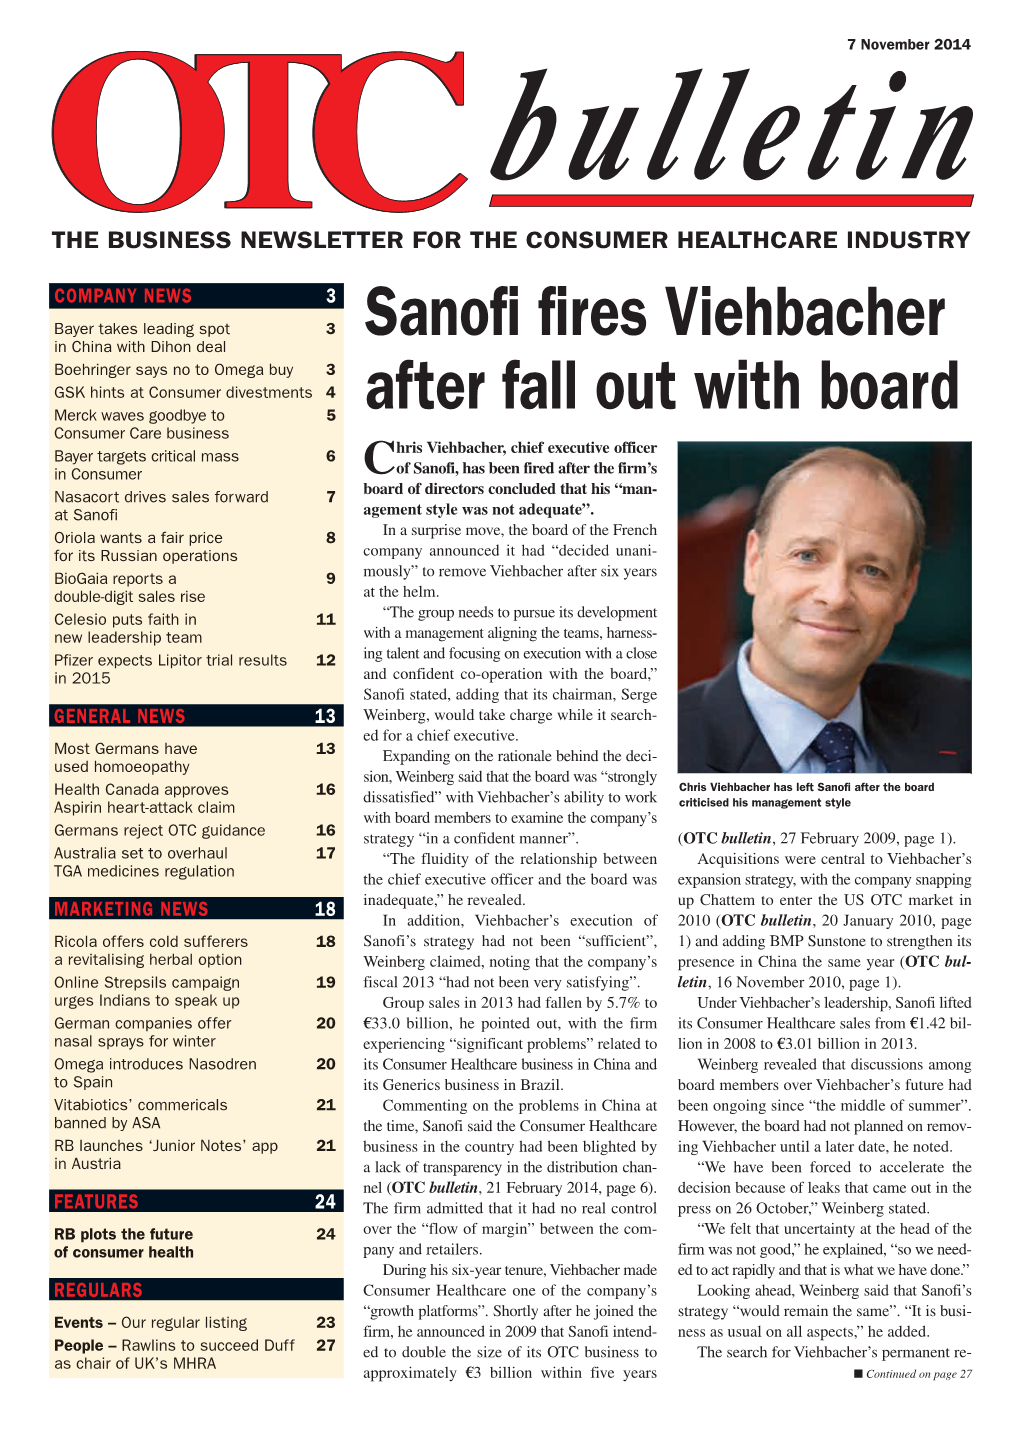 Sanofi Fires Viehbacher After Fall out with Board